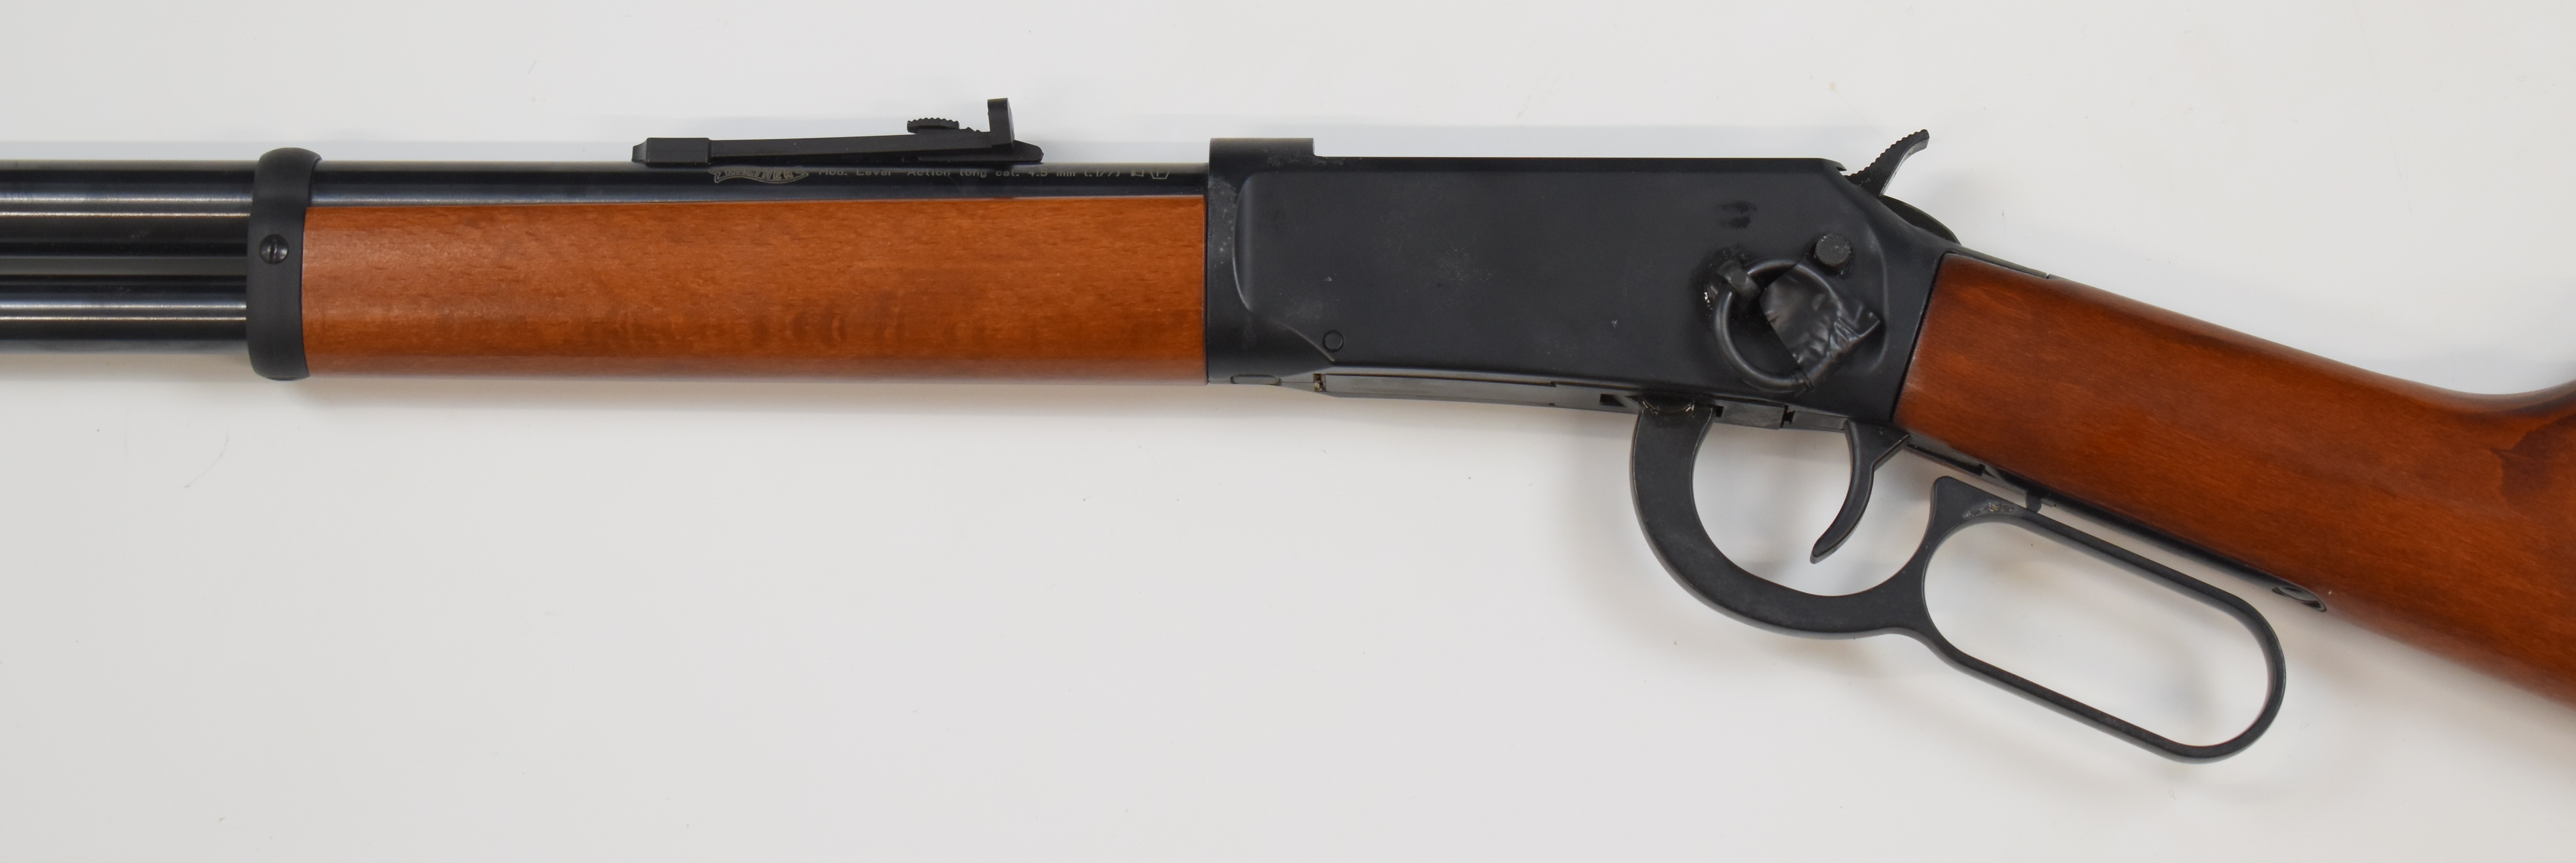 Walther Winchester style lever-action .177 CO2 carbine air rifle with two 8 shot magazines, - Image 8 of 11